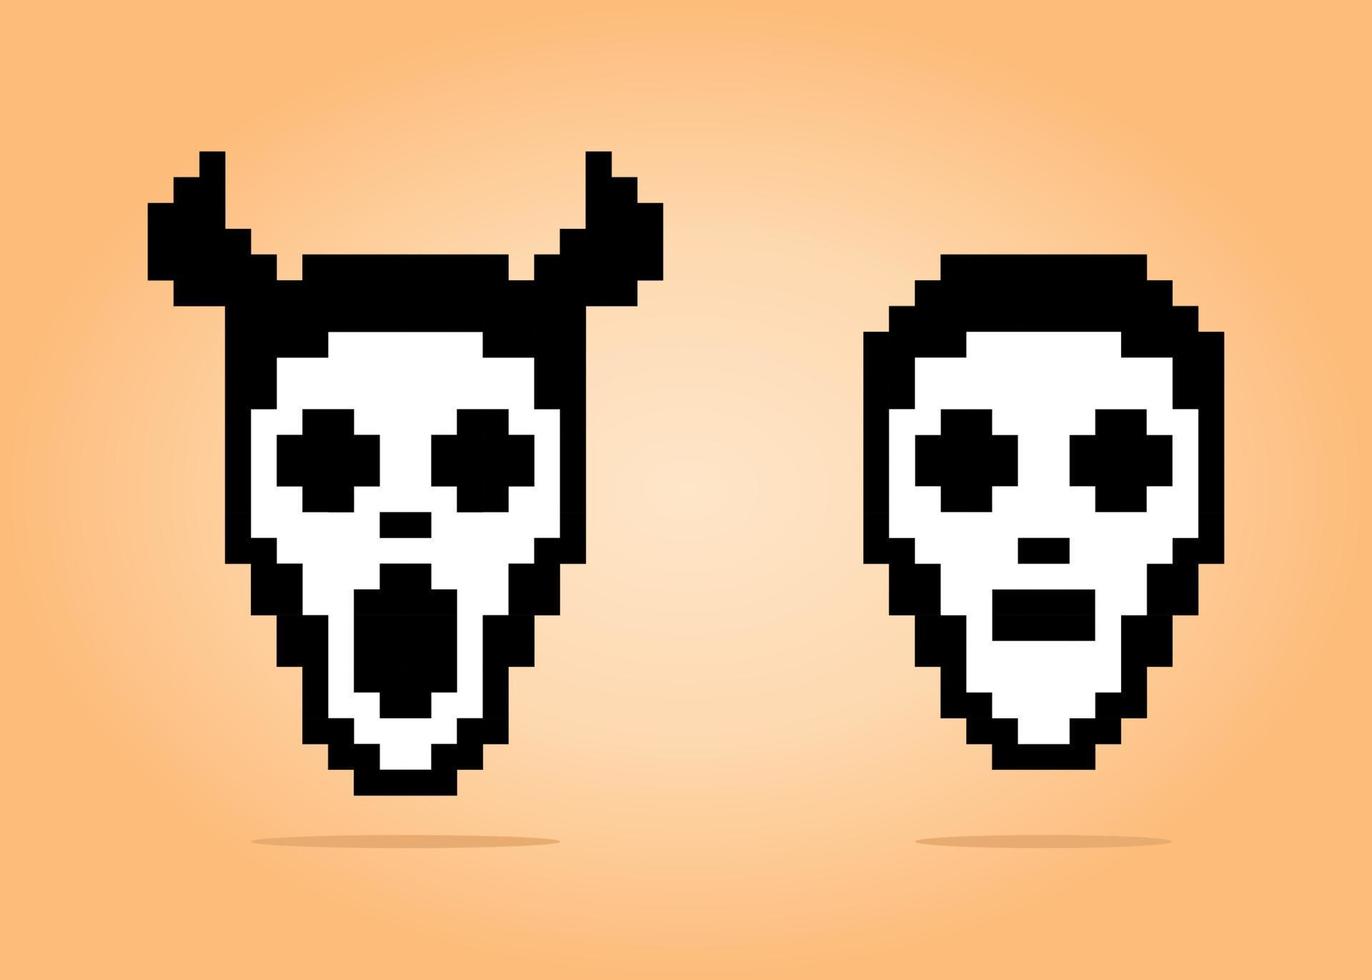 8 bit pixels of scary face mask. Halloween costumes for asset games and Cross Stitch patterns in vector illustrations.